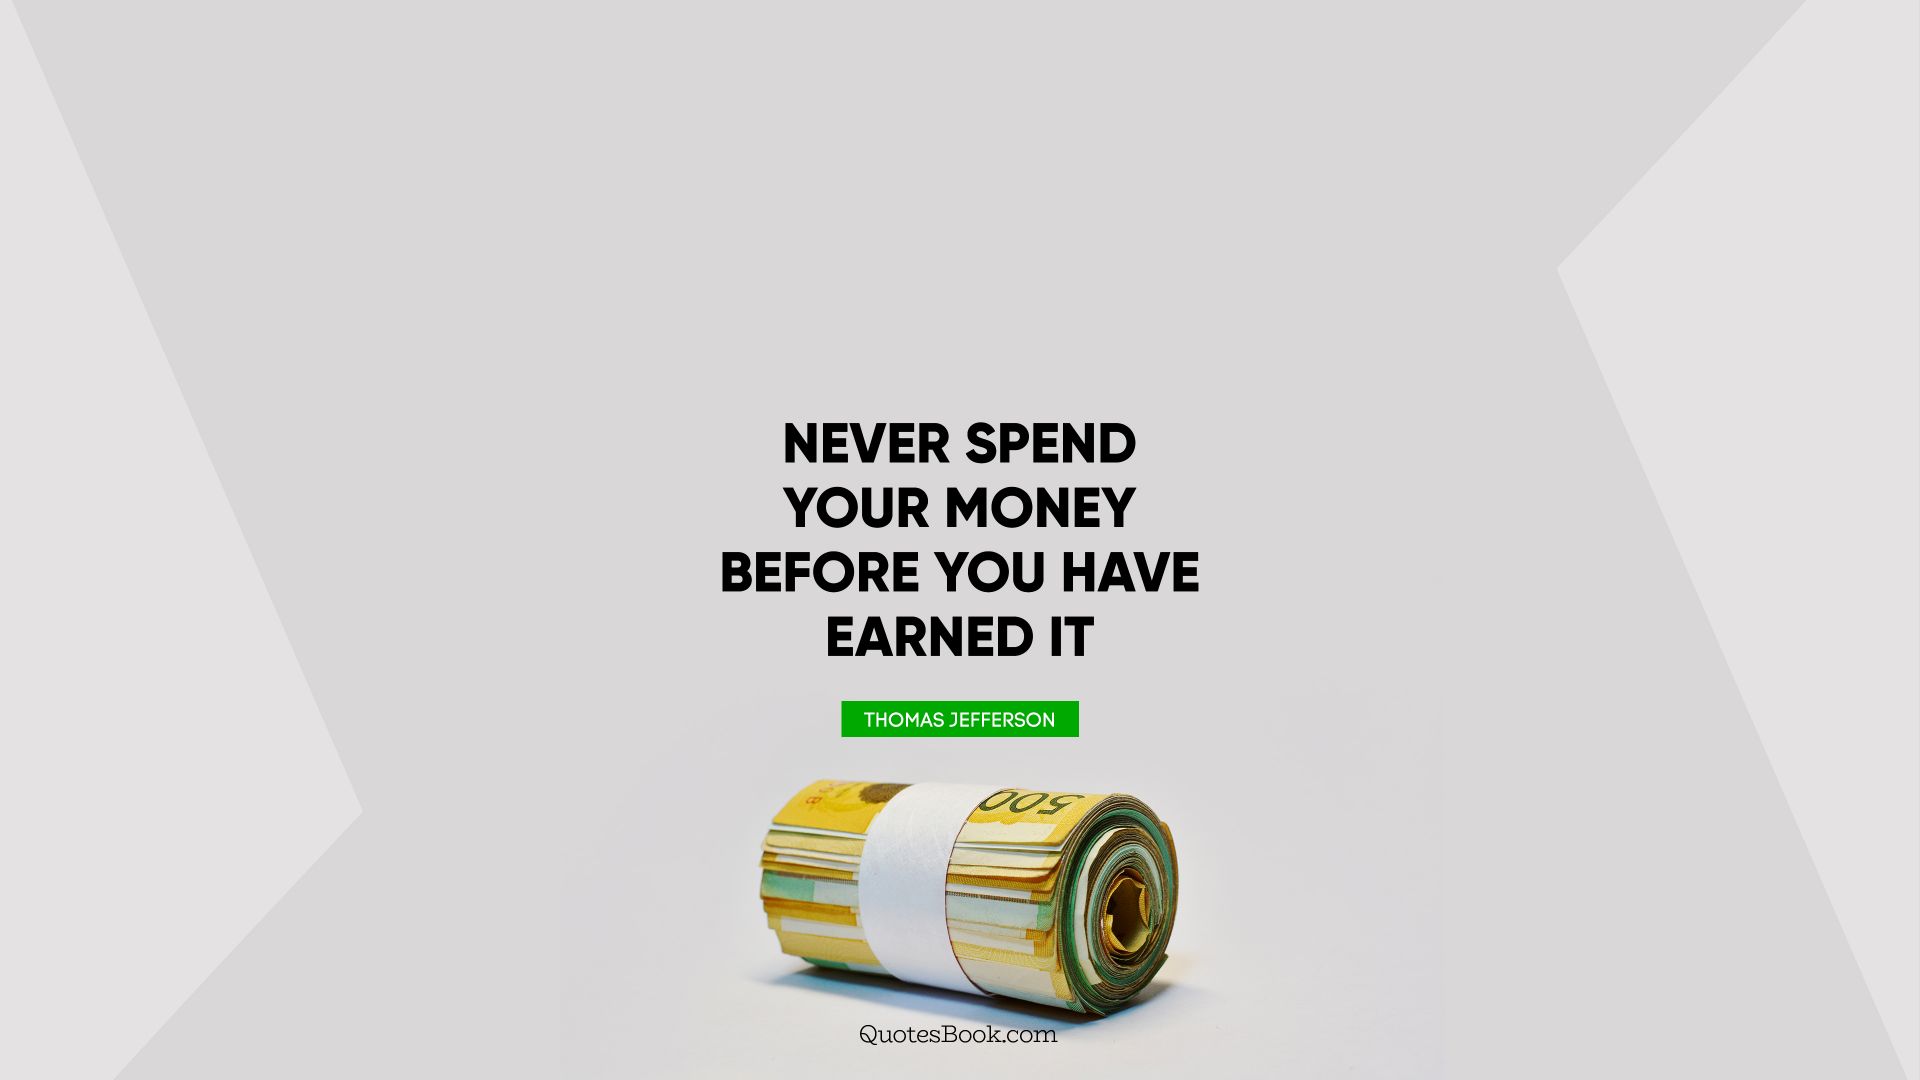 Never spend your money before you have earned it. - Quote by Thomas Jefferson 